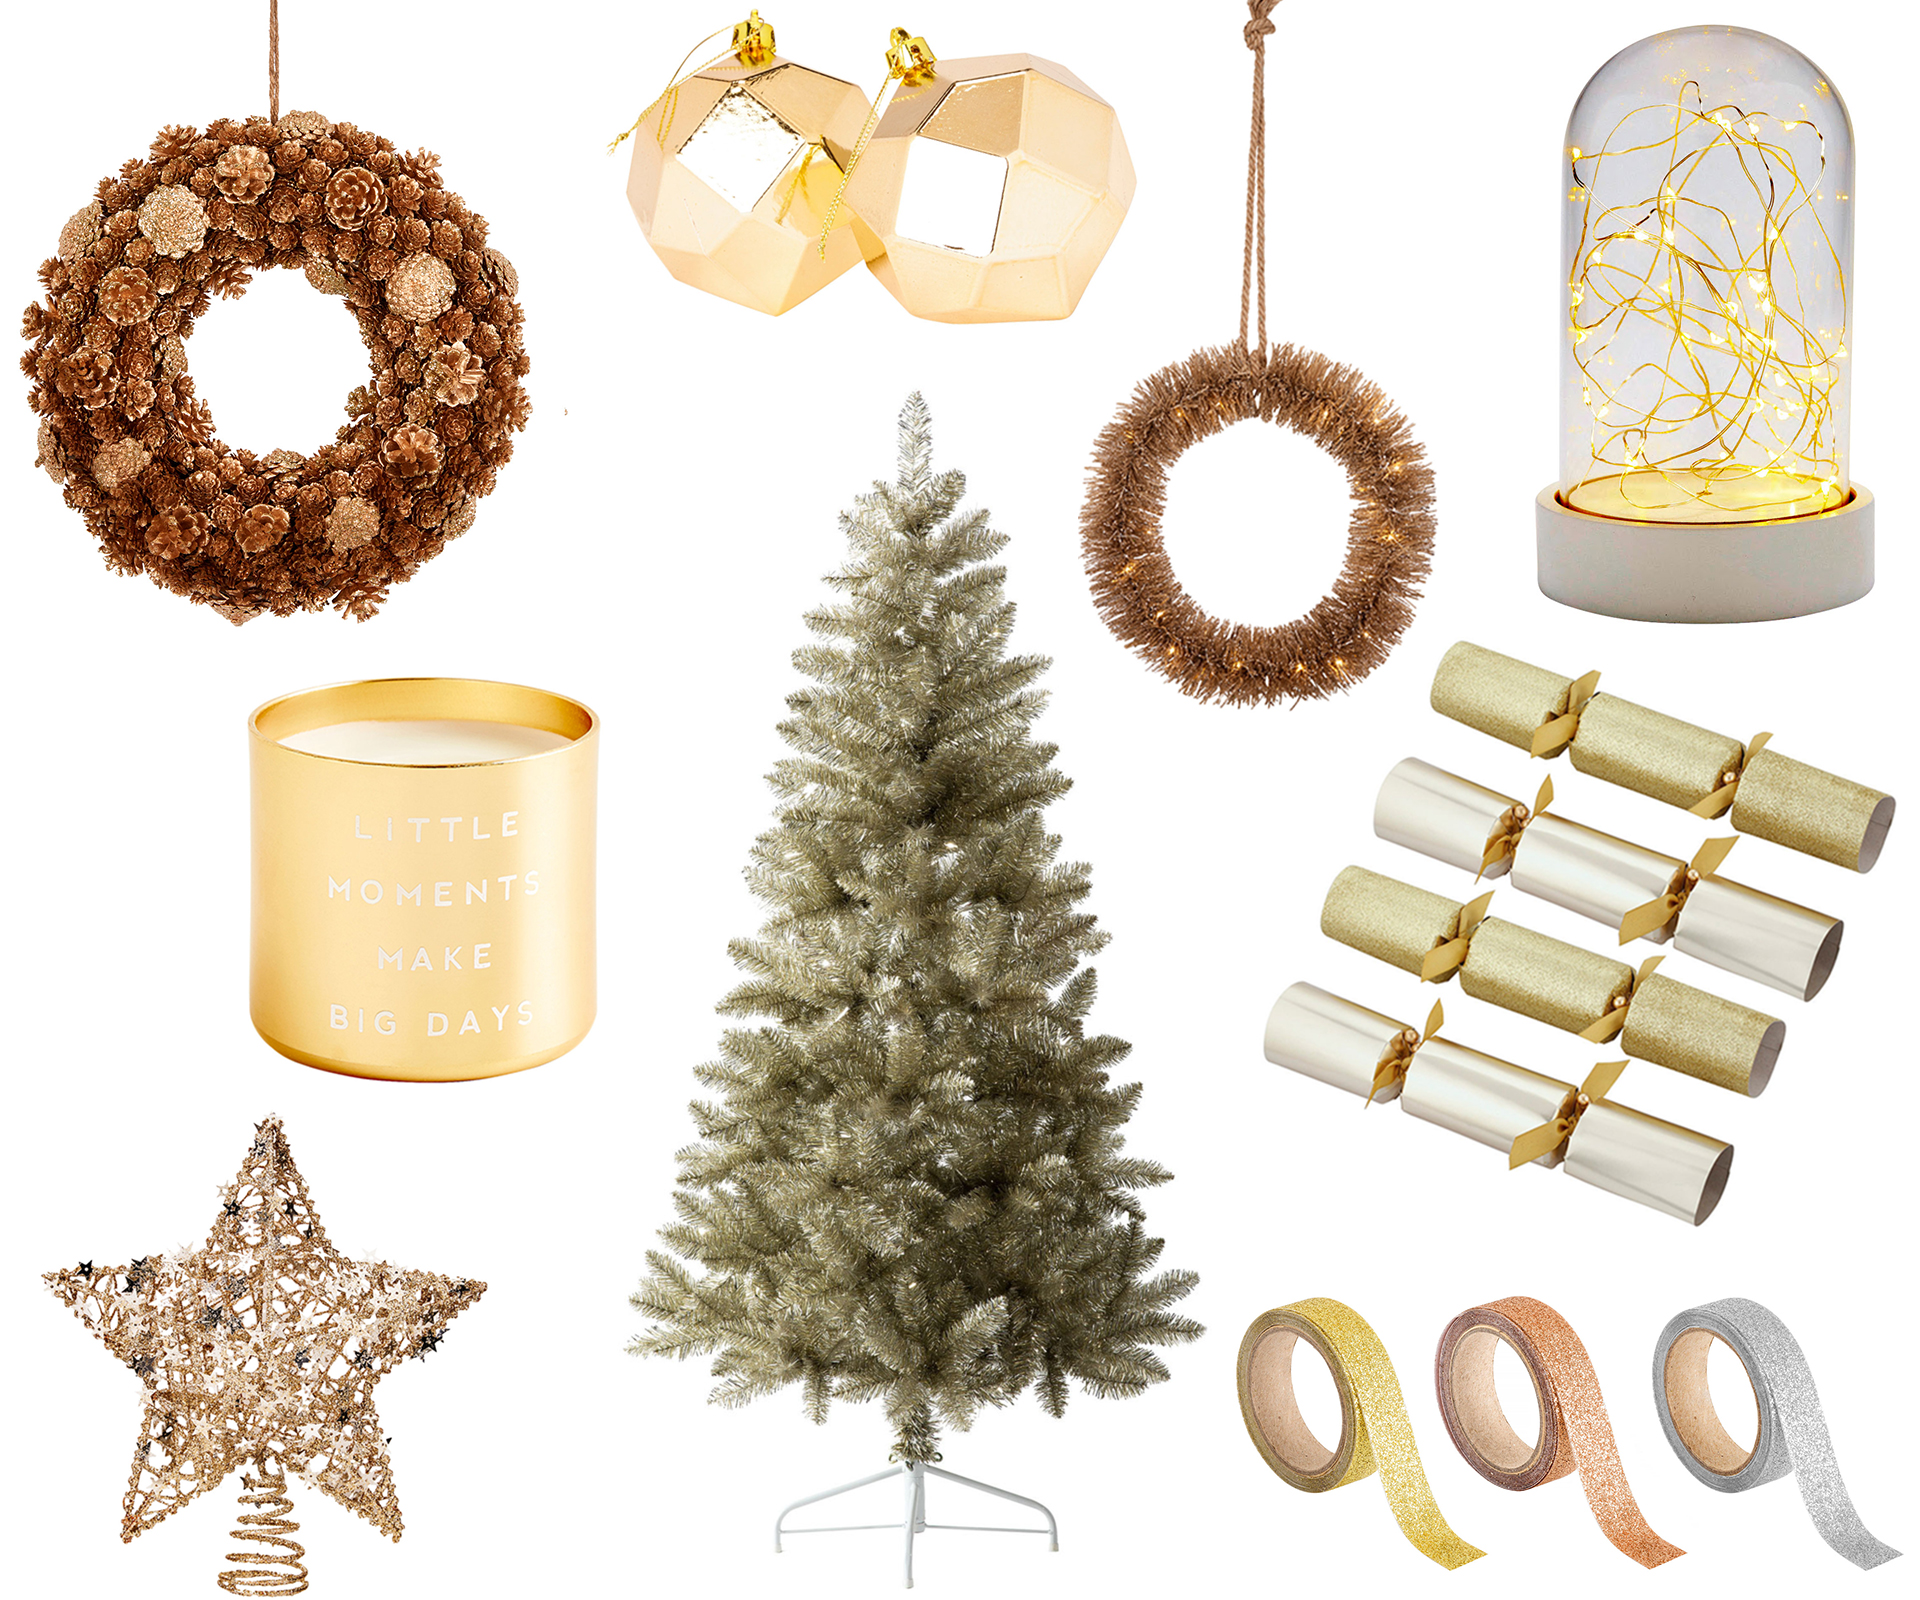 27 Metallic Christmas decorations that will make your decor glitter